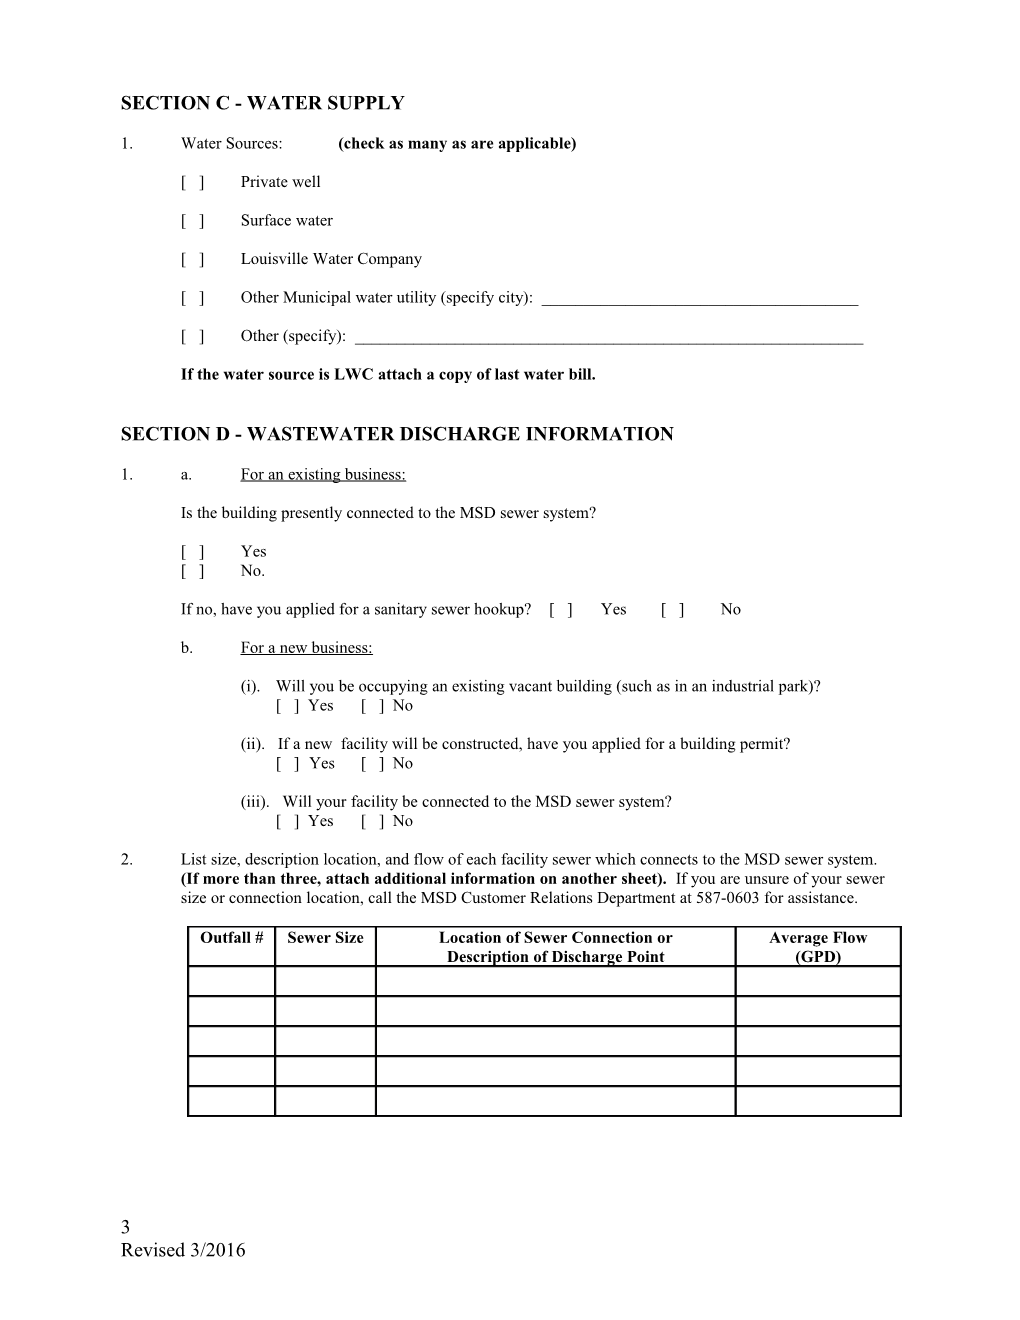 Instructions to Fill Out